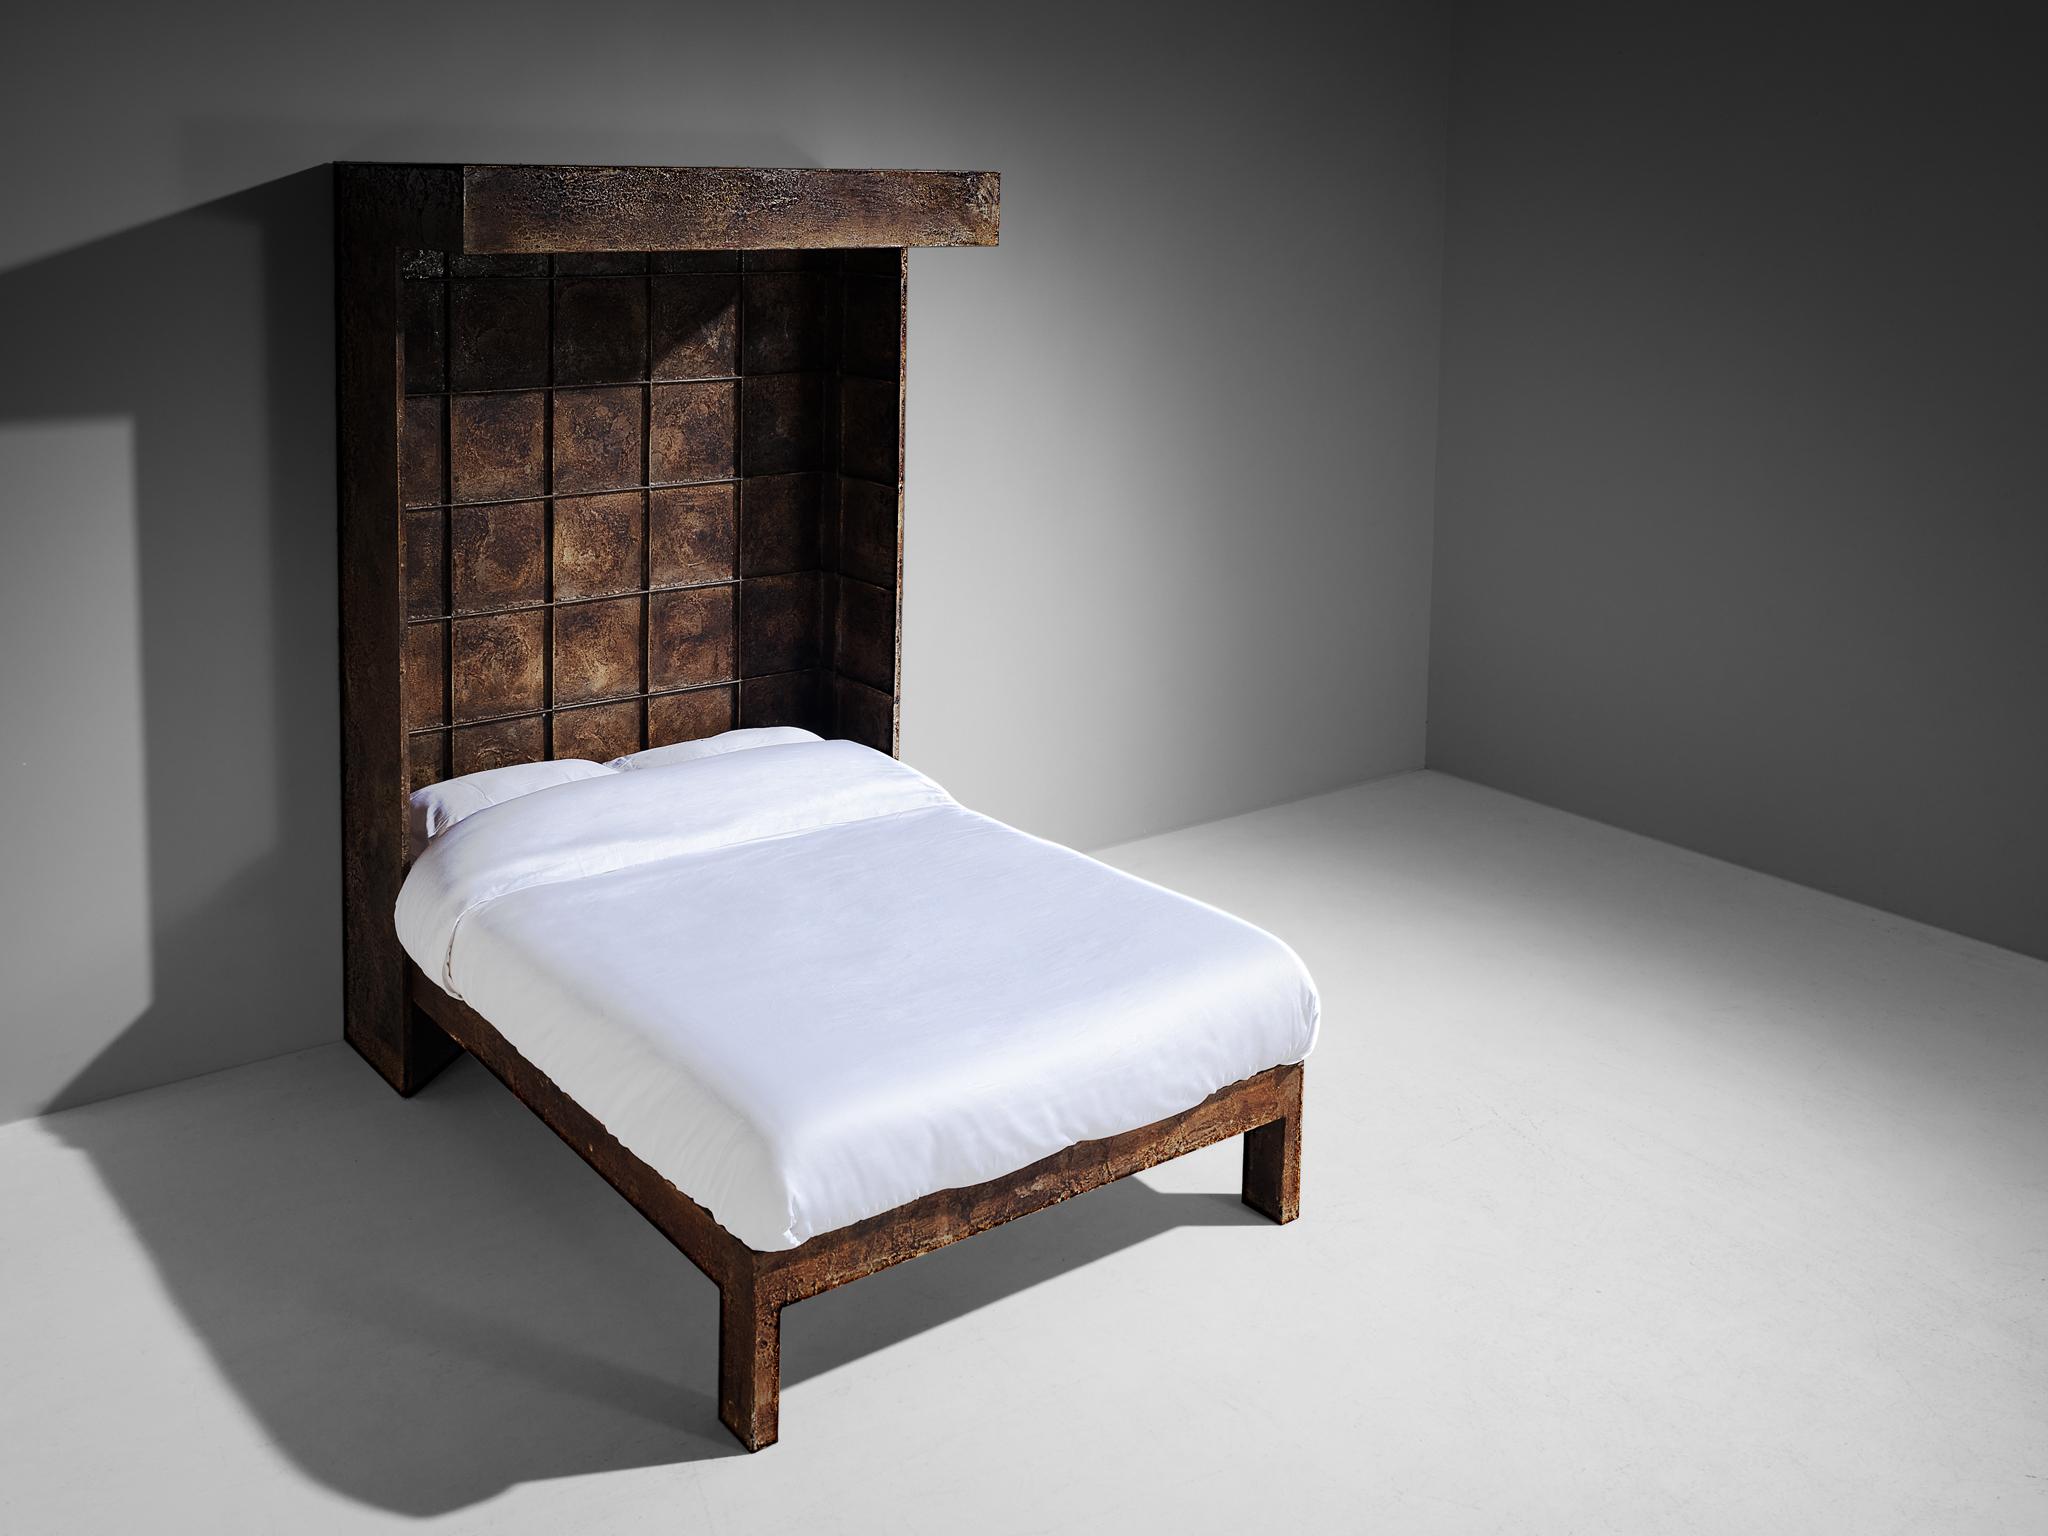 Pia Manu, bed, wrought iron, Belgium, 1960s 

This one of a kind bed designed in the workshop of Pia Manu is truly spectacular. The most prominent feature is the sizeable headboard that is executed in wrought iron. Sharp geometrical weld lines are